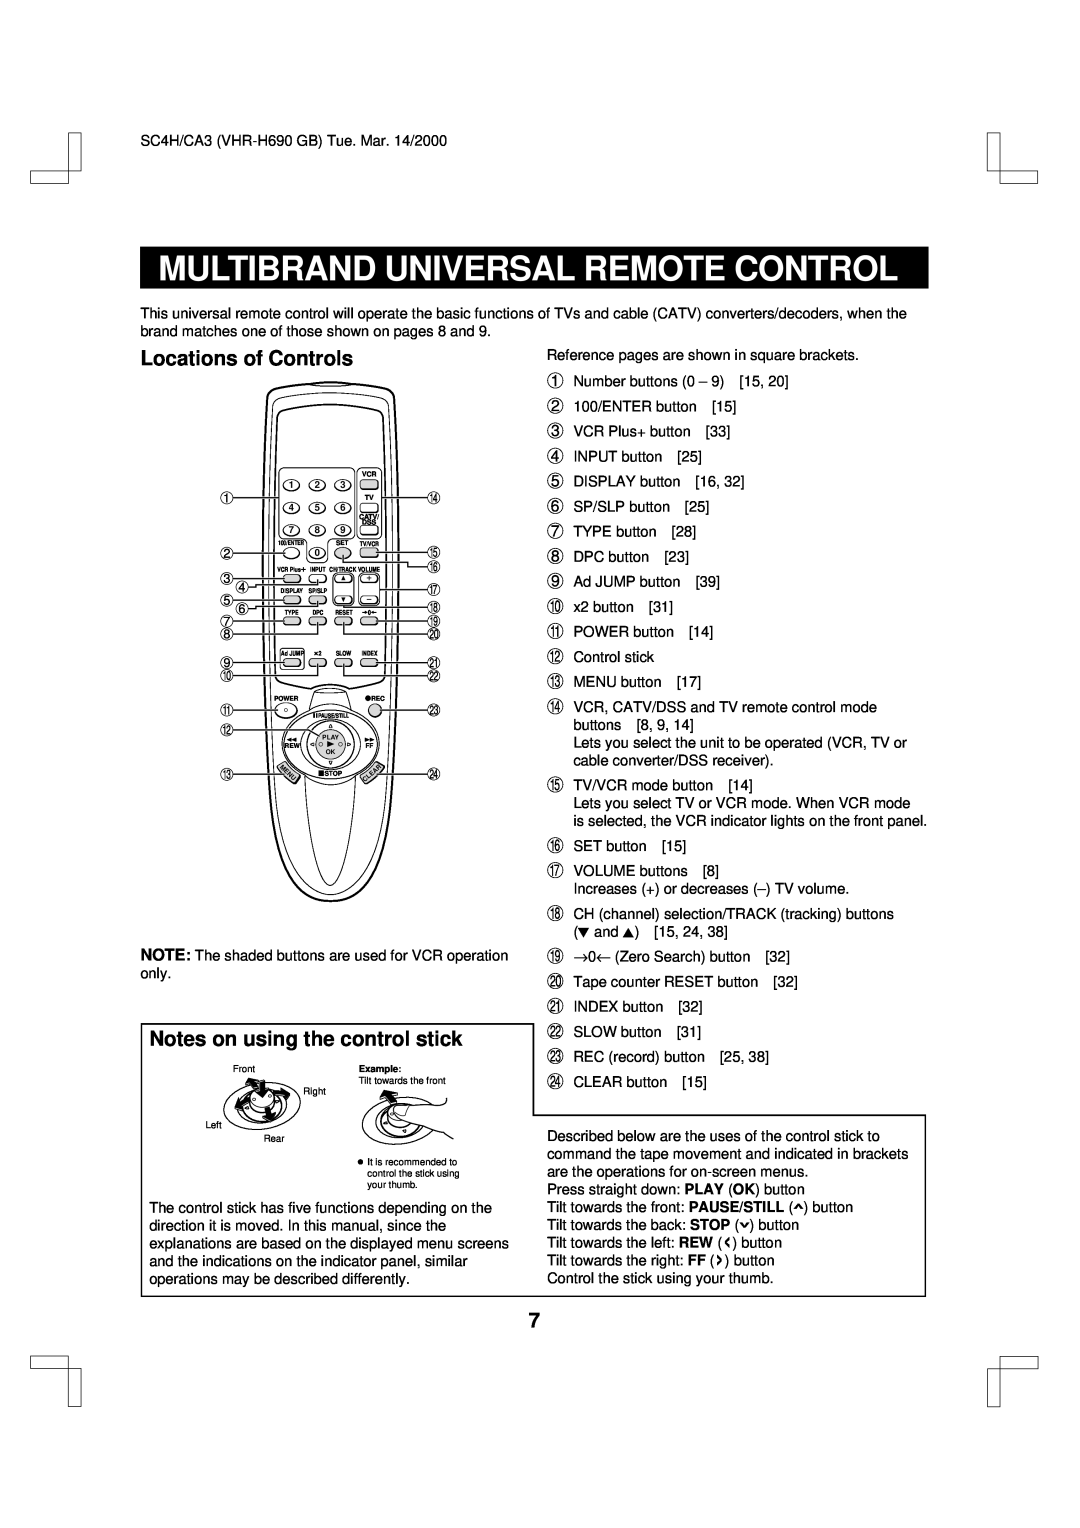 Sanyo VHR-H690 Multibrand Universal Remote Control, Locations of Controls, Notes on using the control stick 